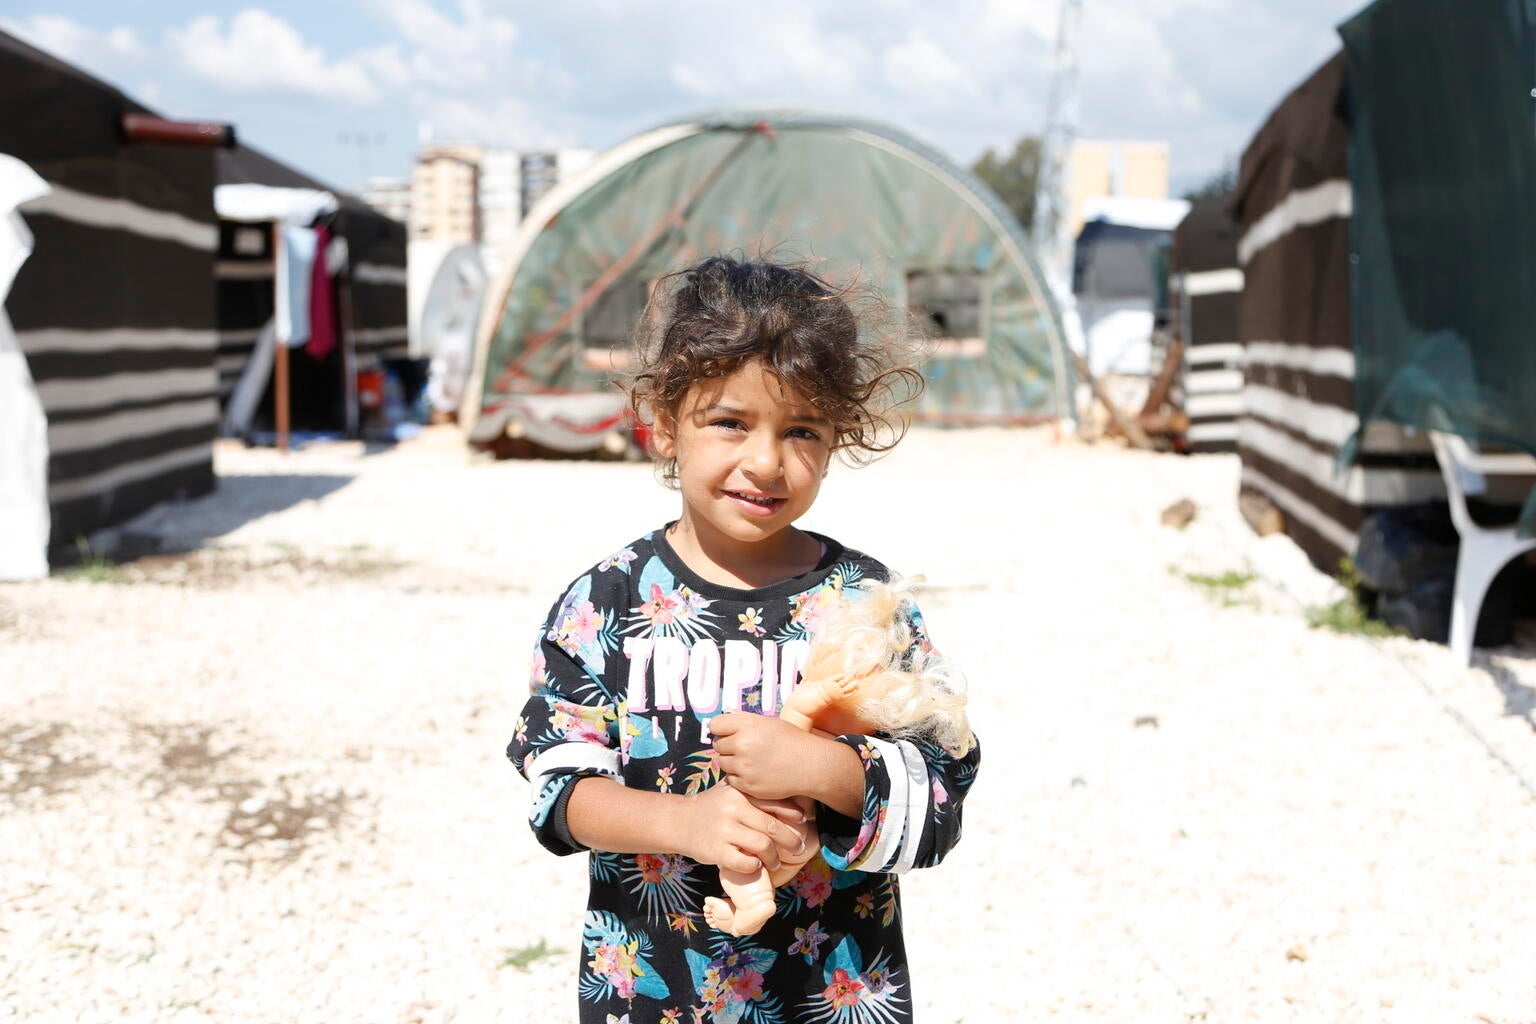 In Türkiye, thousands of children and families lost their homes and are now living in temporary shelters. 